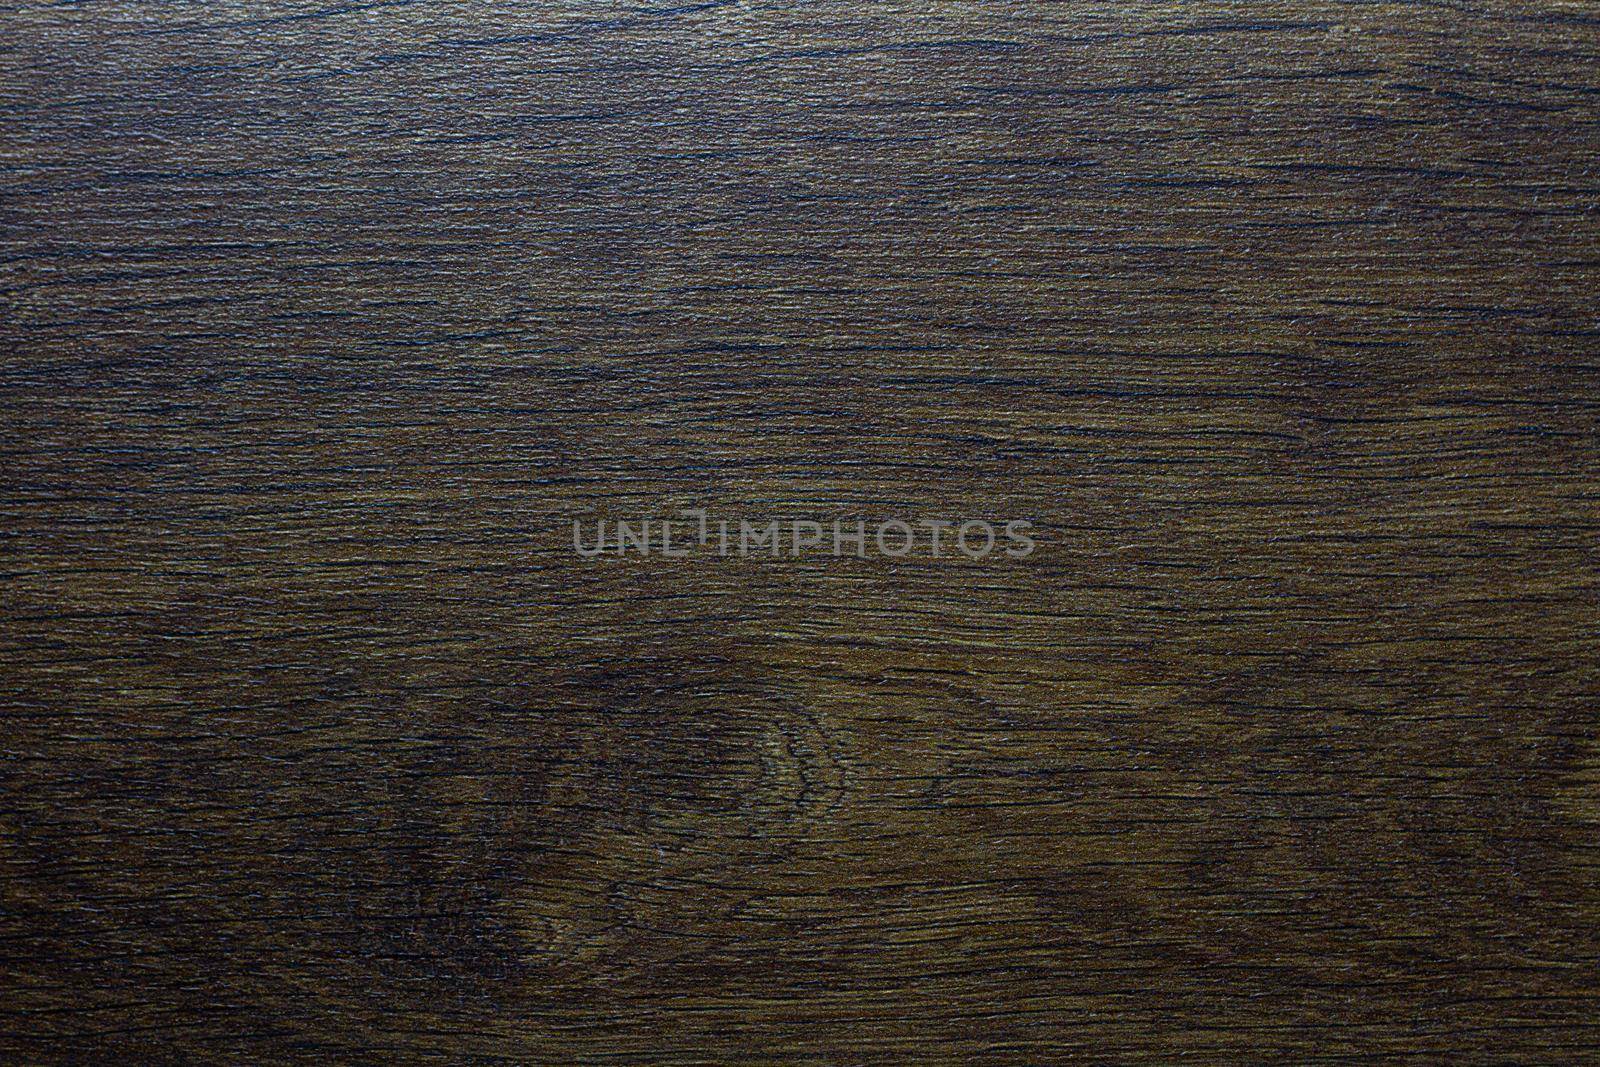 Wood texture. Wooden board close up. The cracks are deep. Laminate flooring. Tree rings in a cut.